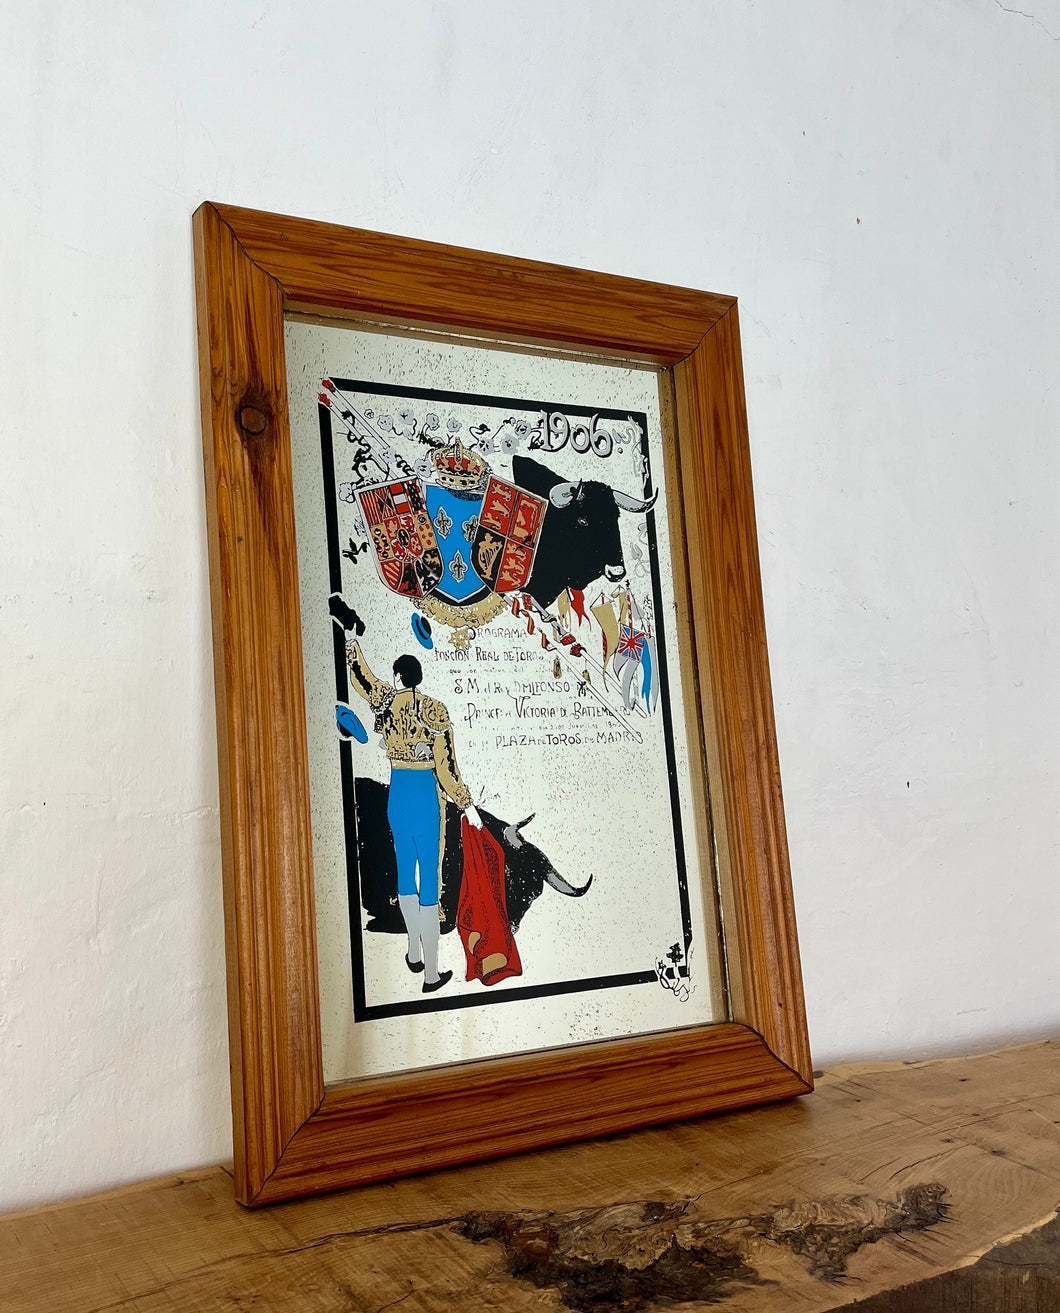 Historical Spanish bull fighting matador advertisement mirror 1906, Royal event, vinatge wall art, picture frame, advertising collectibles